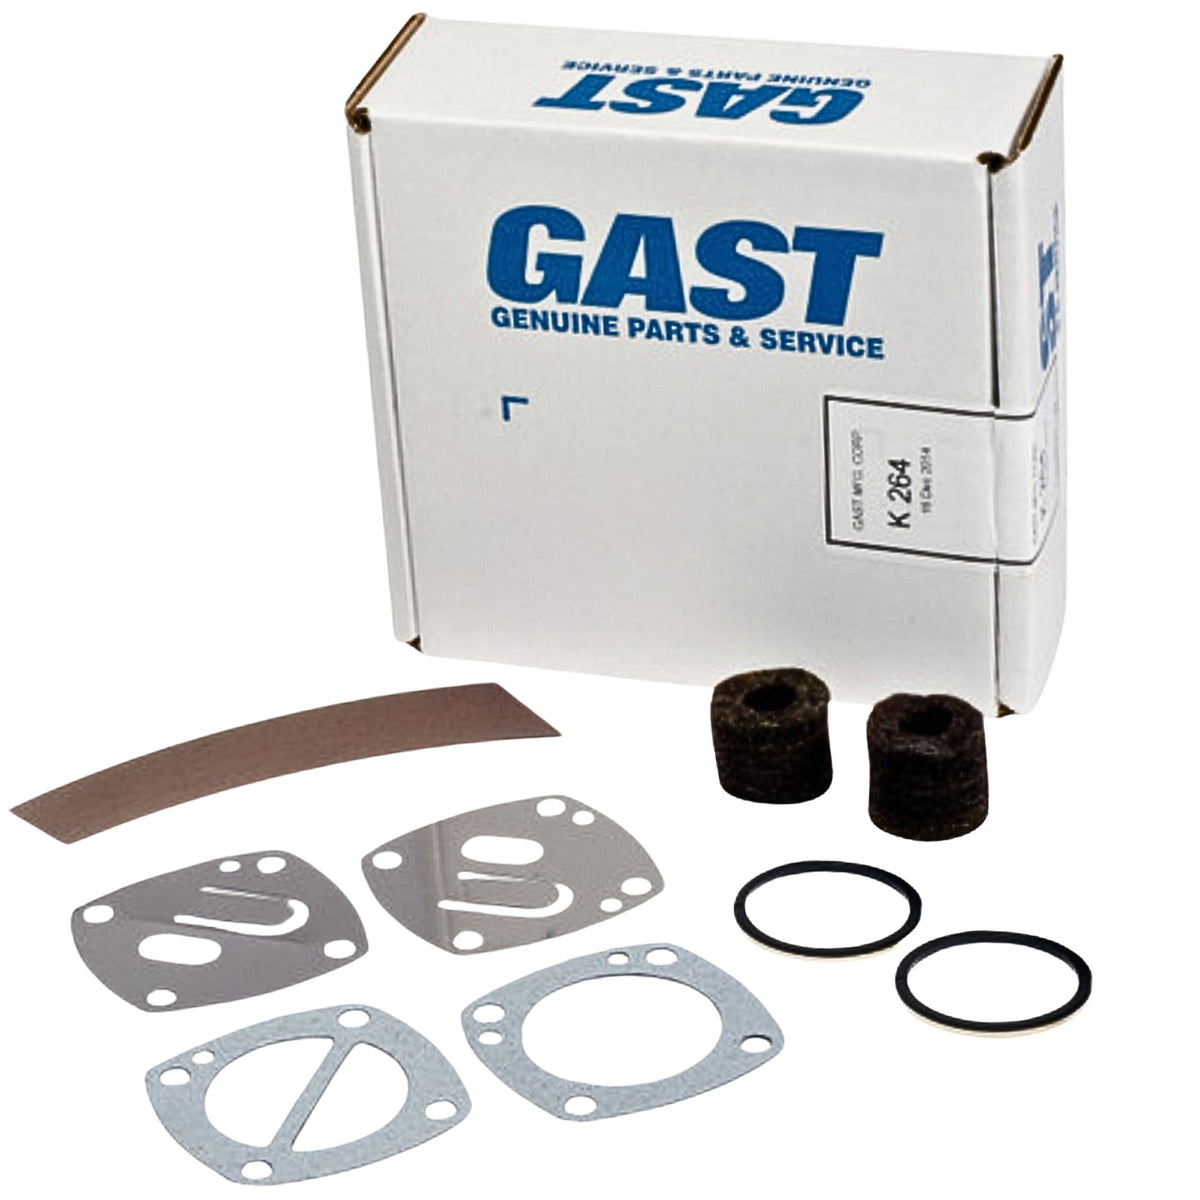 Gast | 1H/2H/3H/1L/2L/3L Piston Service Kit | K264 used on gast product line